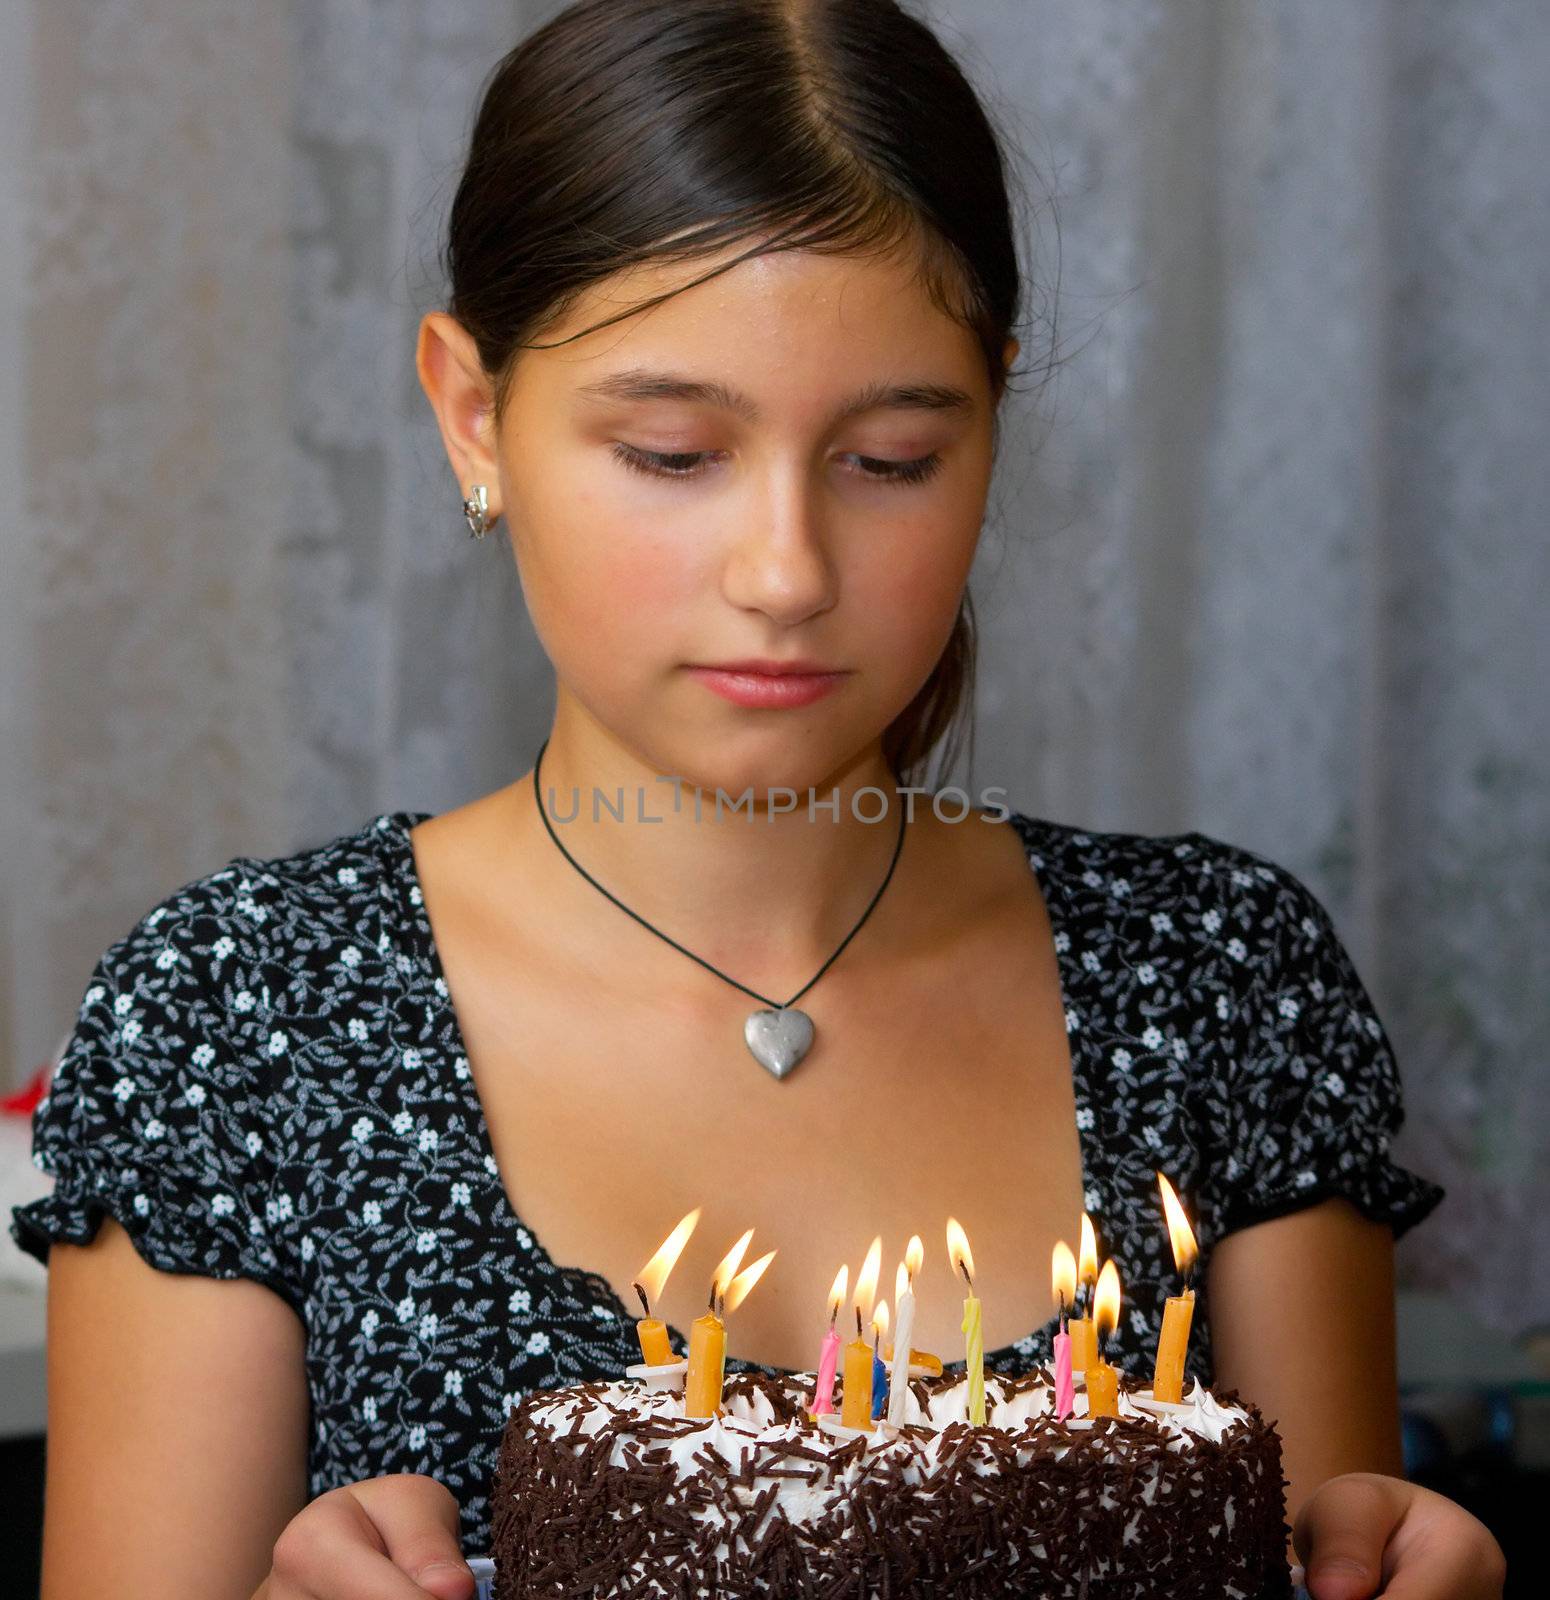 The happy girl holds in hands a celebratory cake with candles